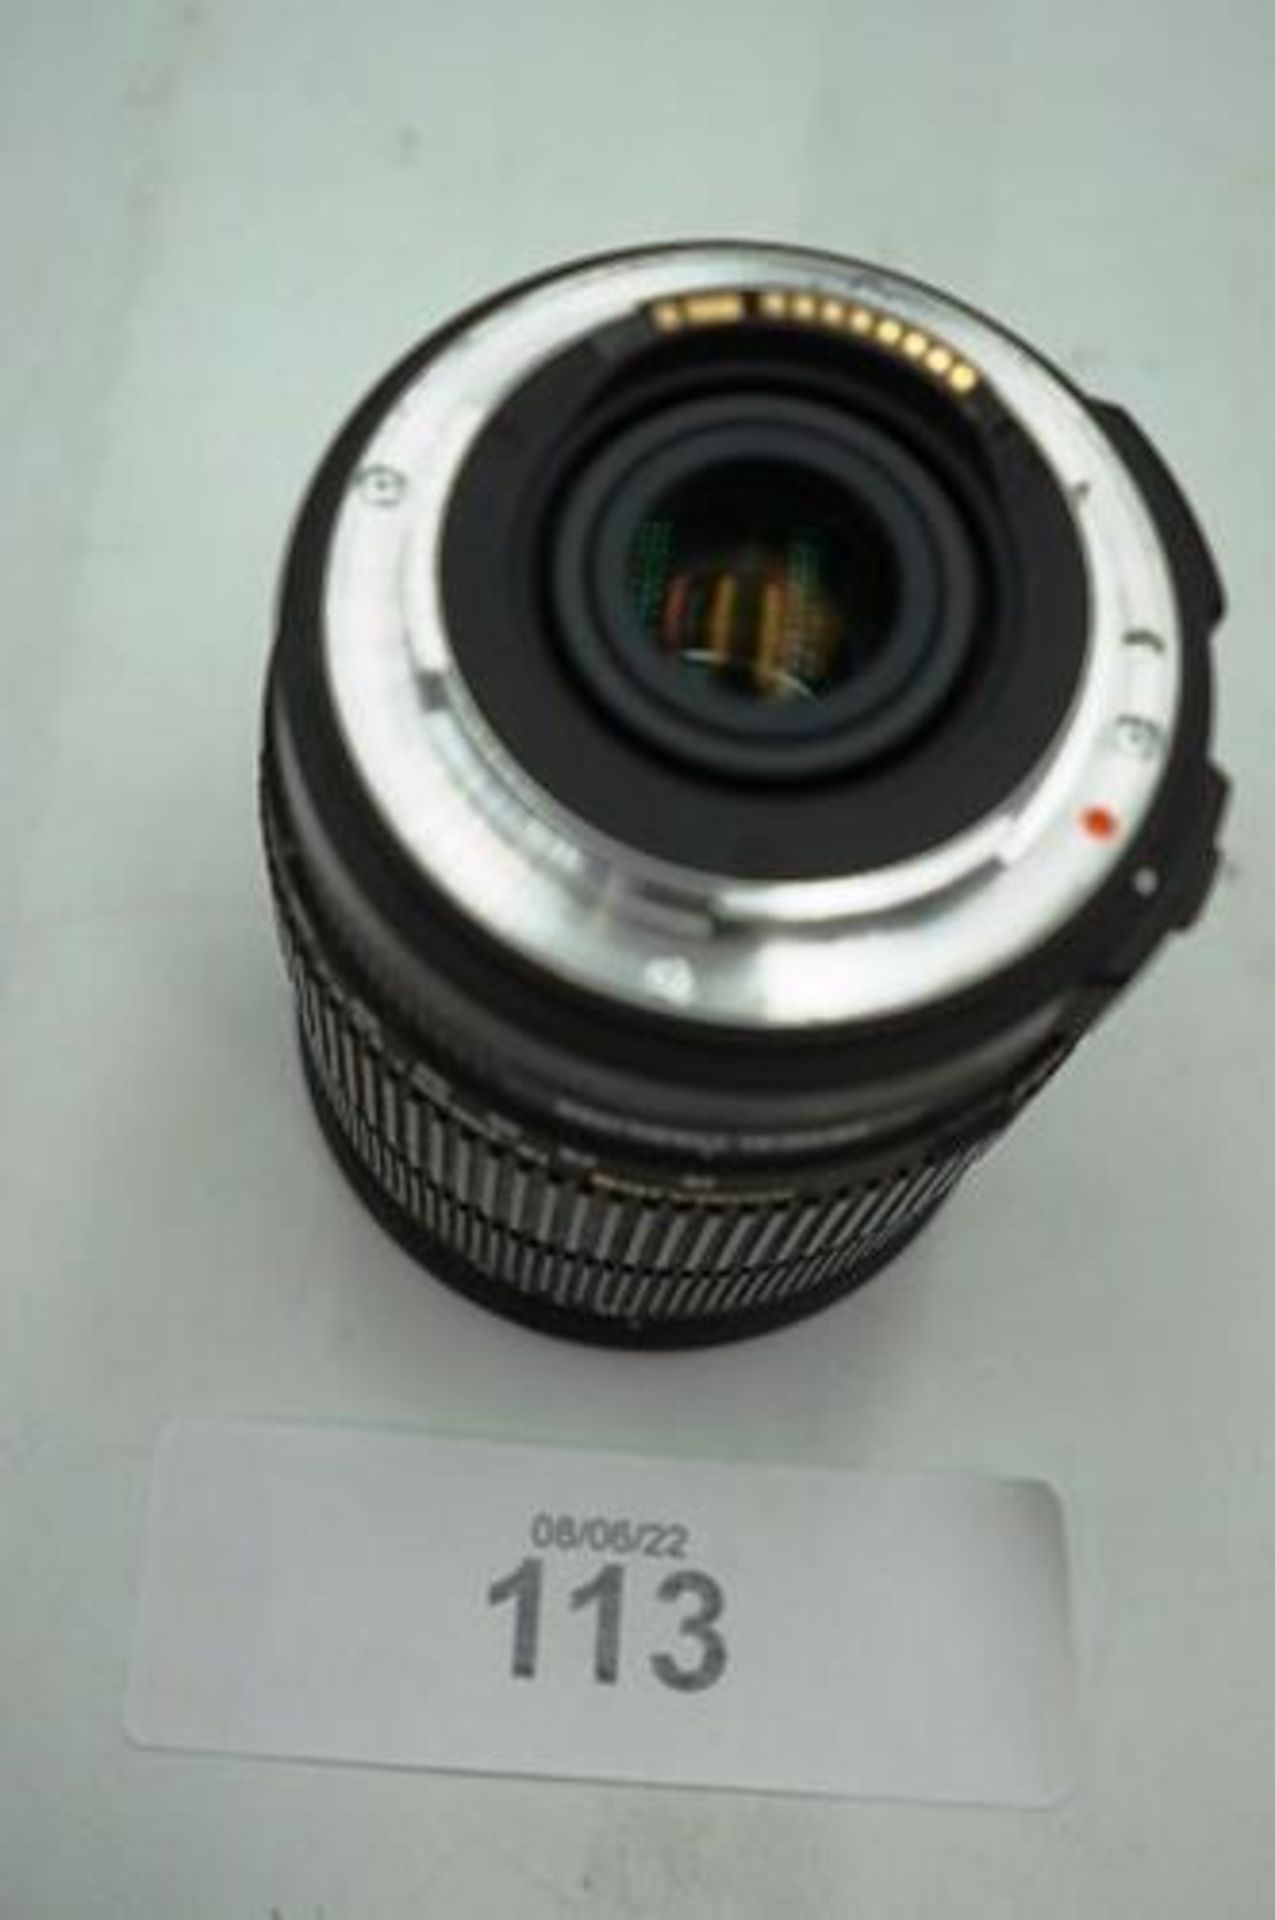 1 x Canon Sigma DC 18-200mm, 1:3.5 - 6.3 camera lens - Second-hand, tested working (Cab1) - Image 3 of 4